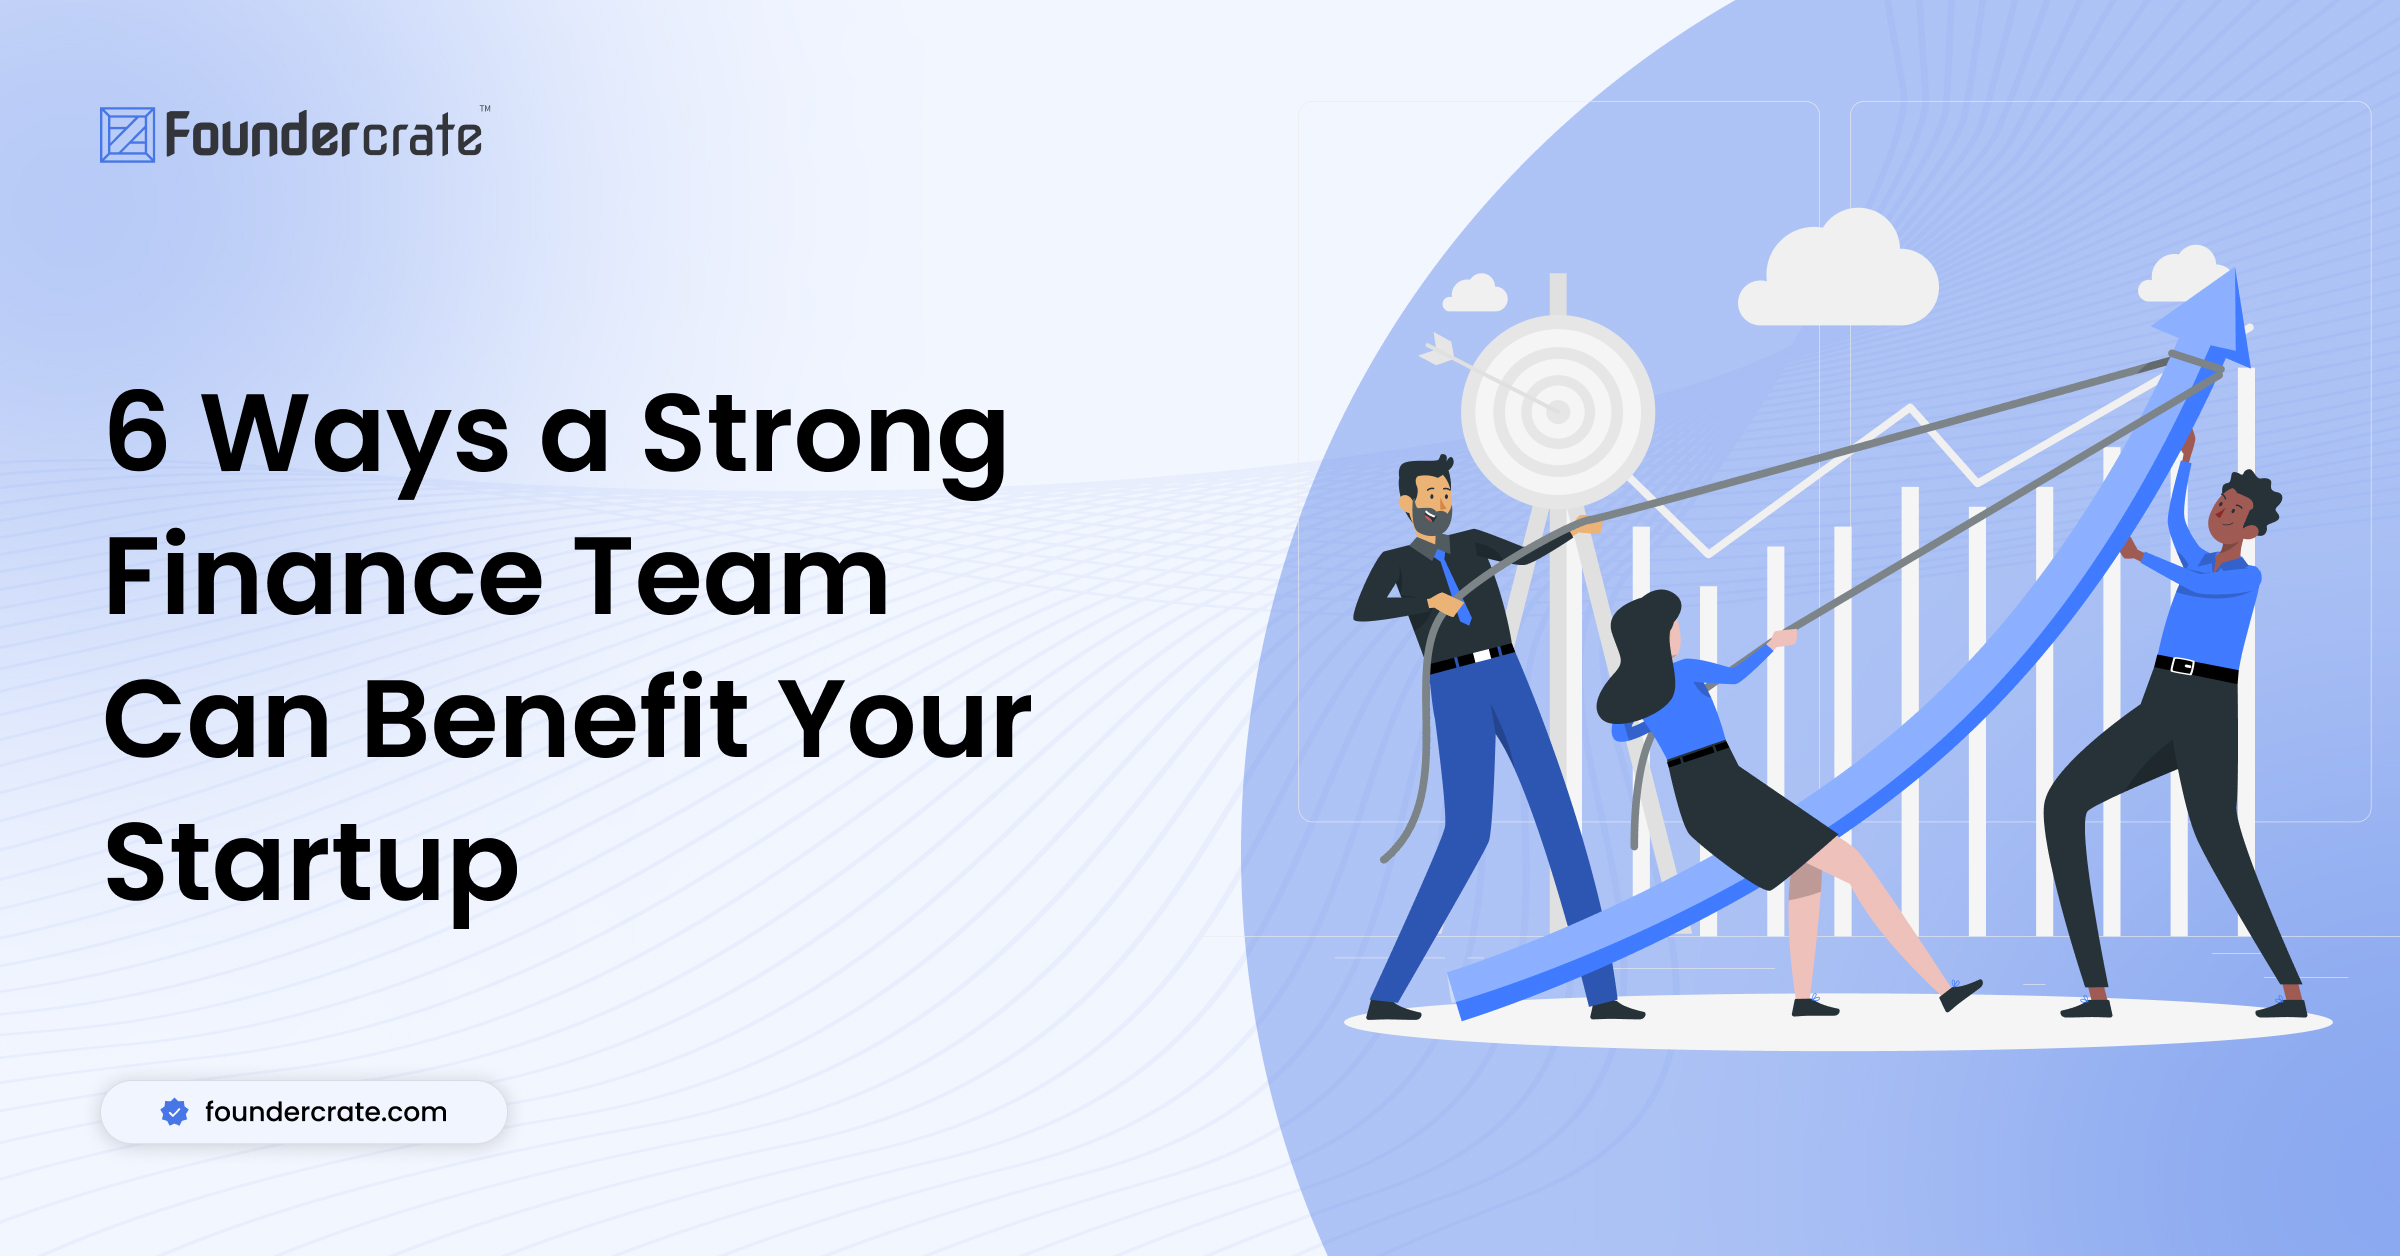 6 Ways a Strong Finance Team Can Benefit Your Startup